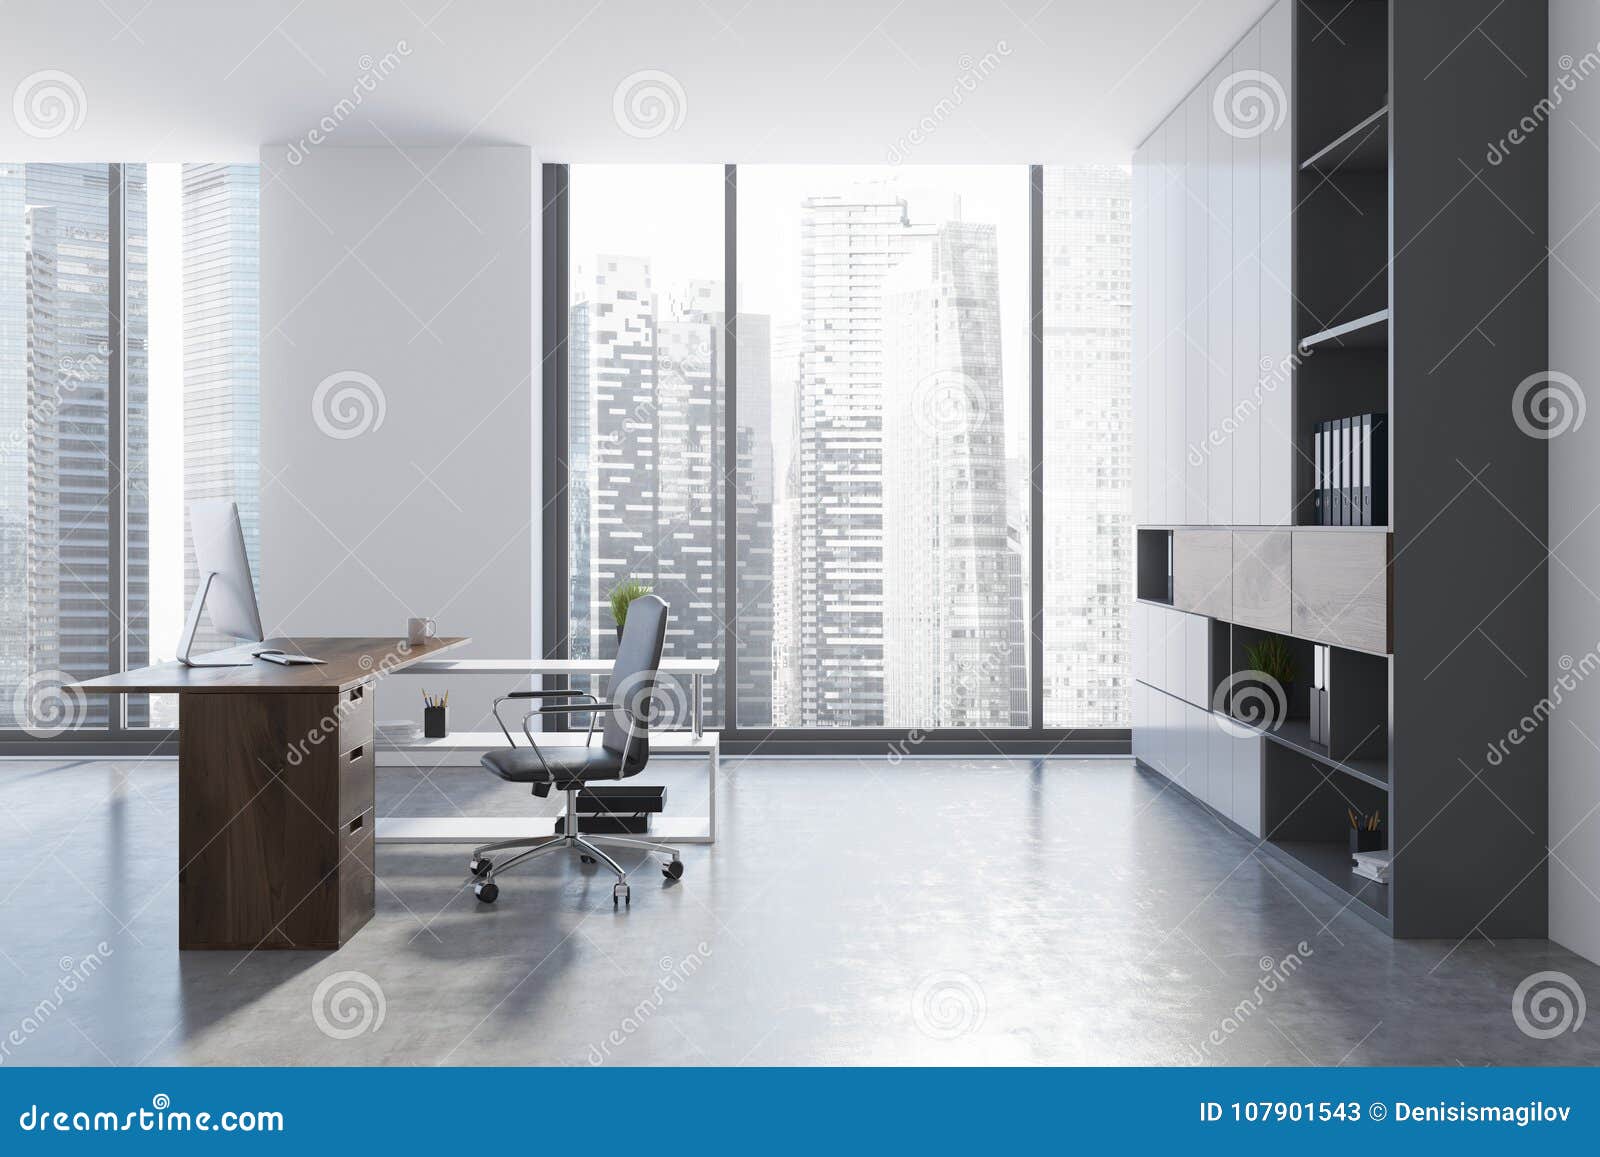 Ceo Office Interior Stock Image Image Of Chairs Background